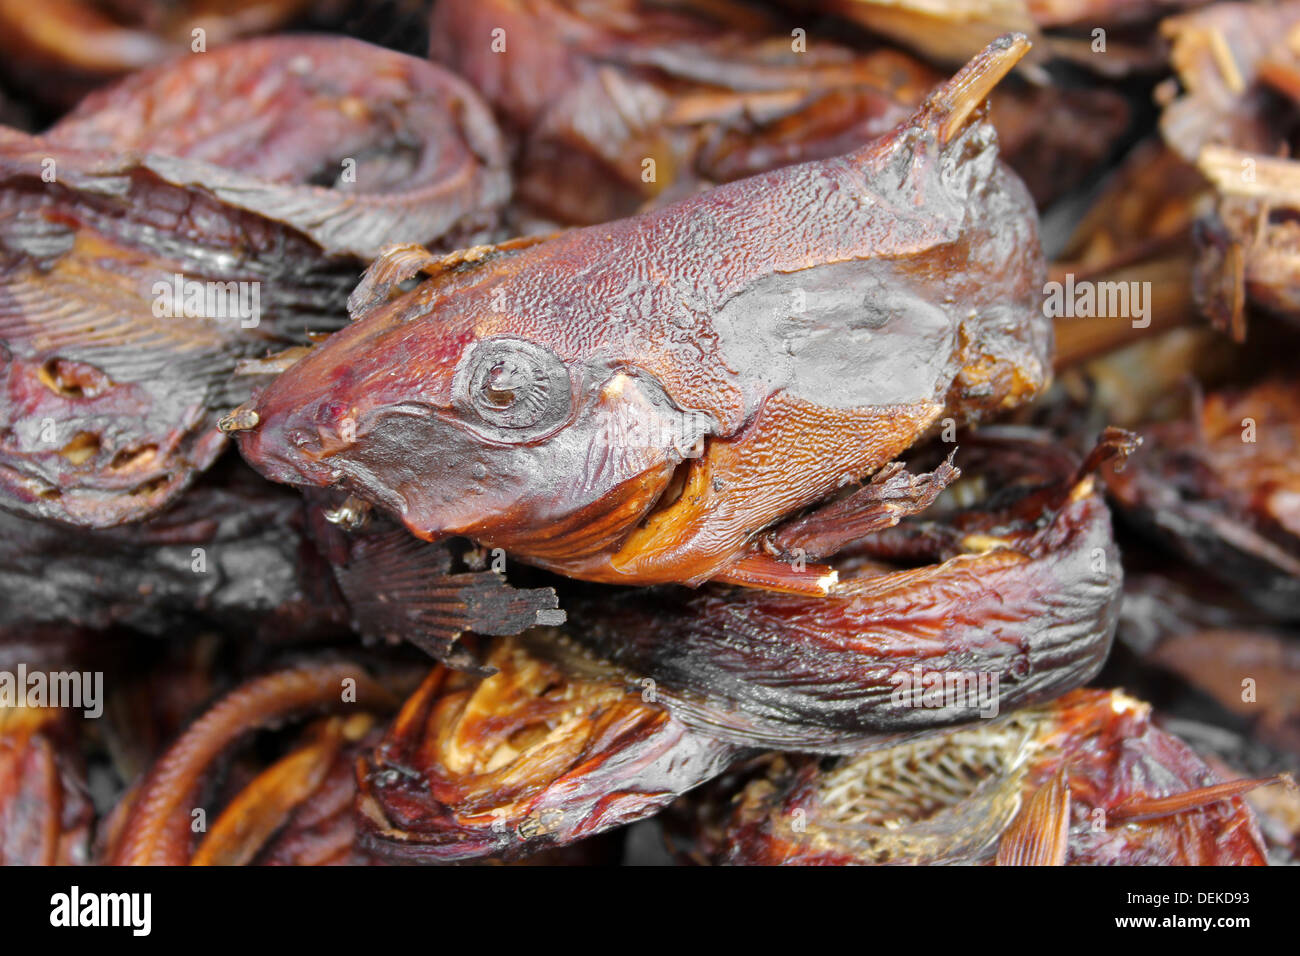 Fish Smoked In Ghanaian Style Stock Photo